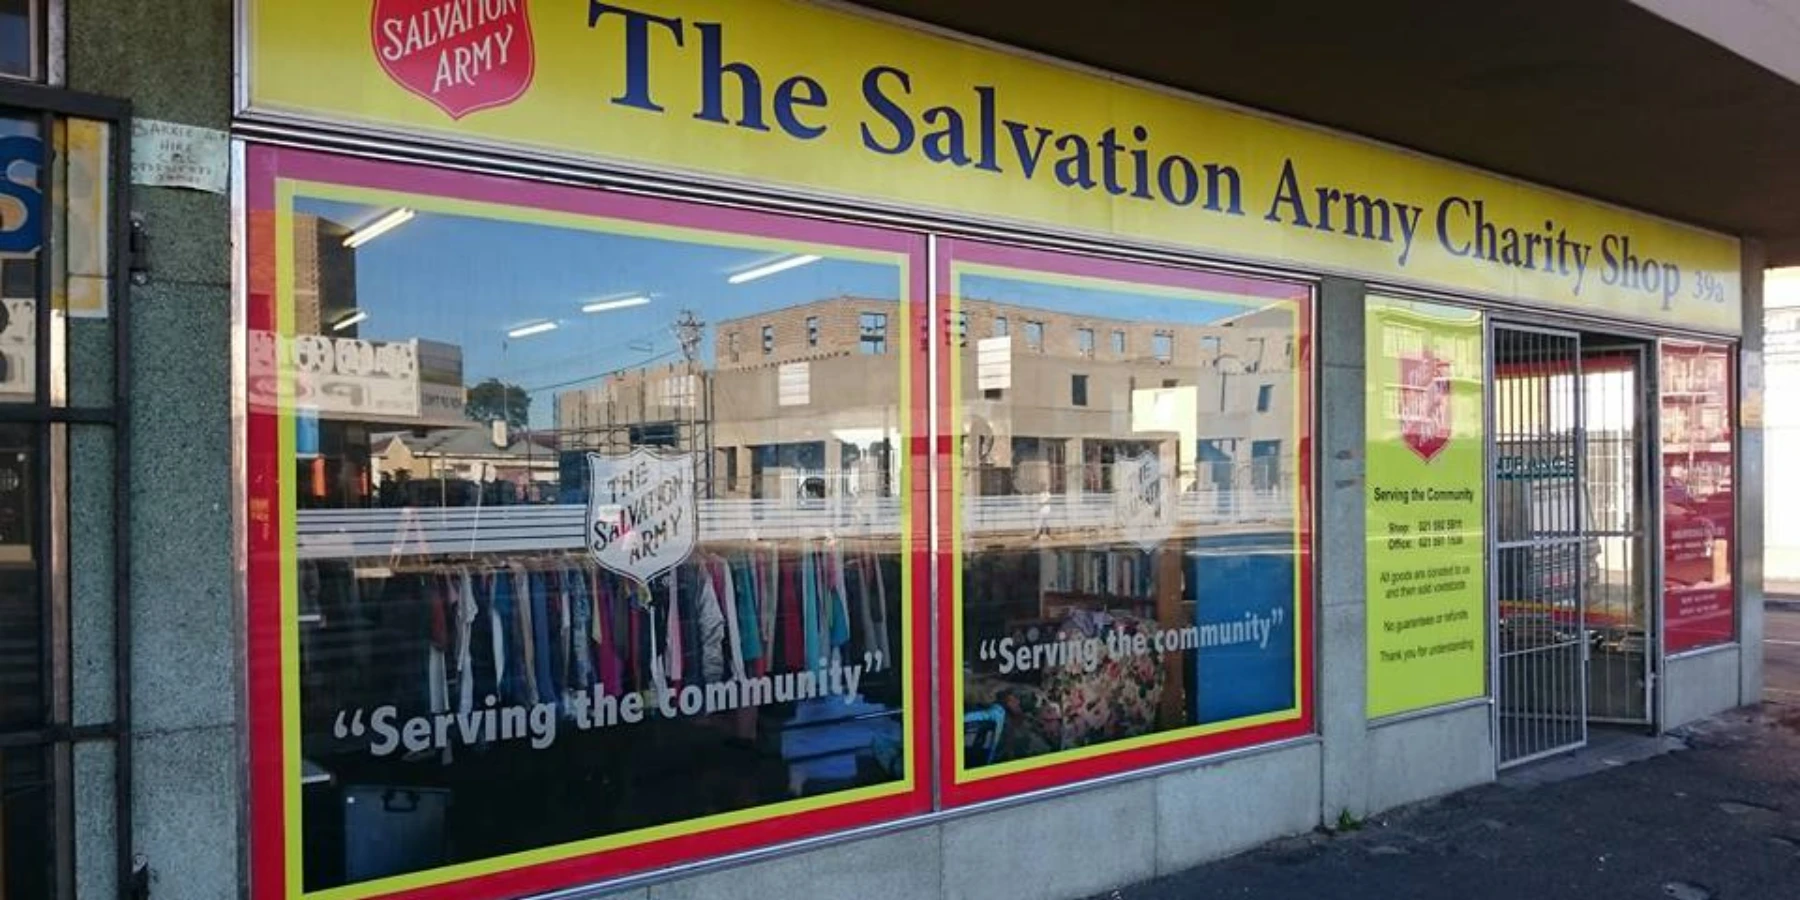 Salvation Army - Donating Furniture in Cape Town